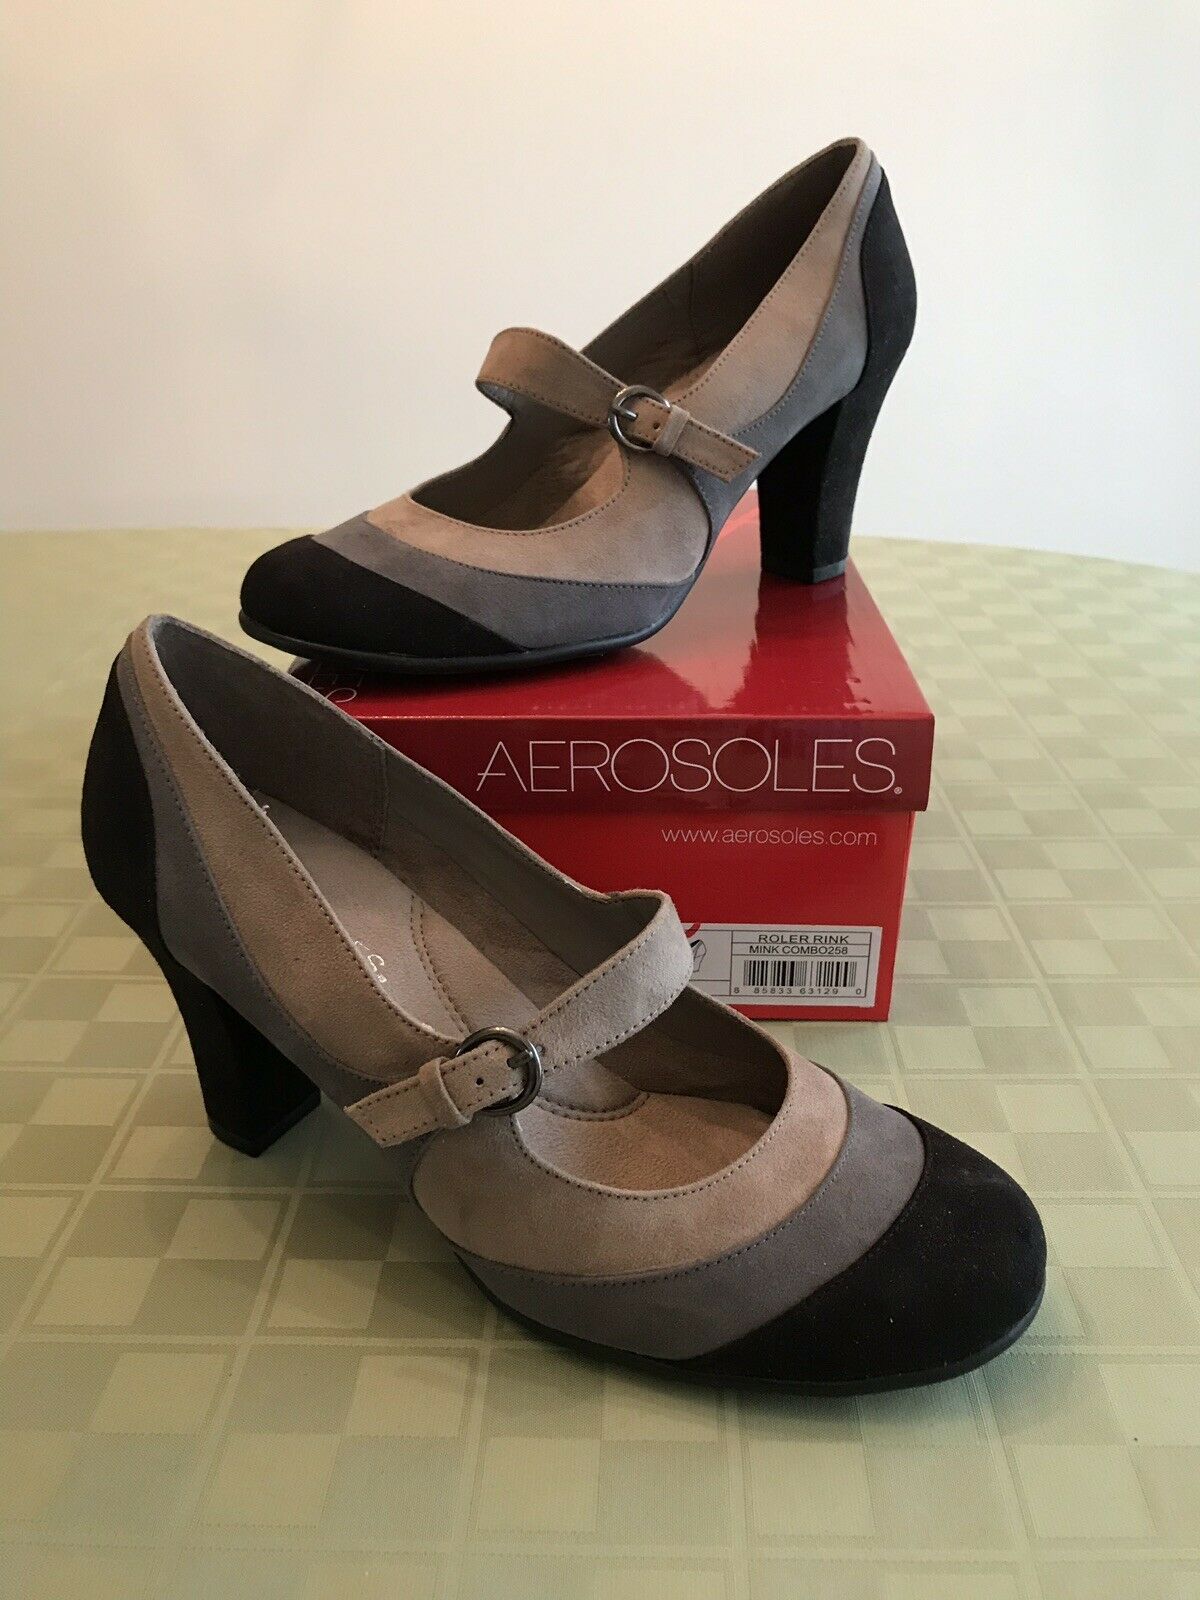 AEROSOLES NEW 9.5 M US: Roler Rink women Mary Jane suede Heels Shoes. New In Box